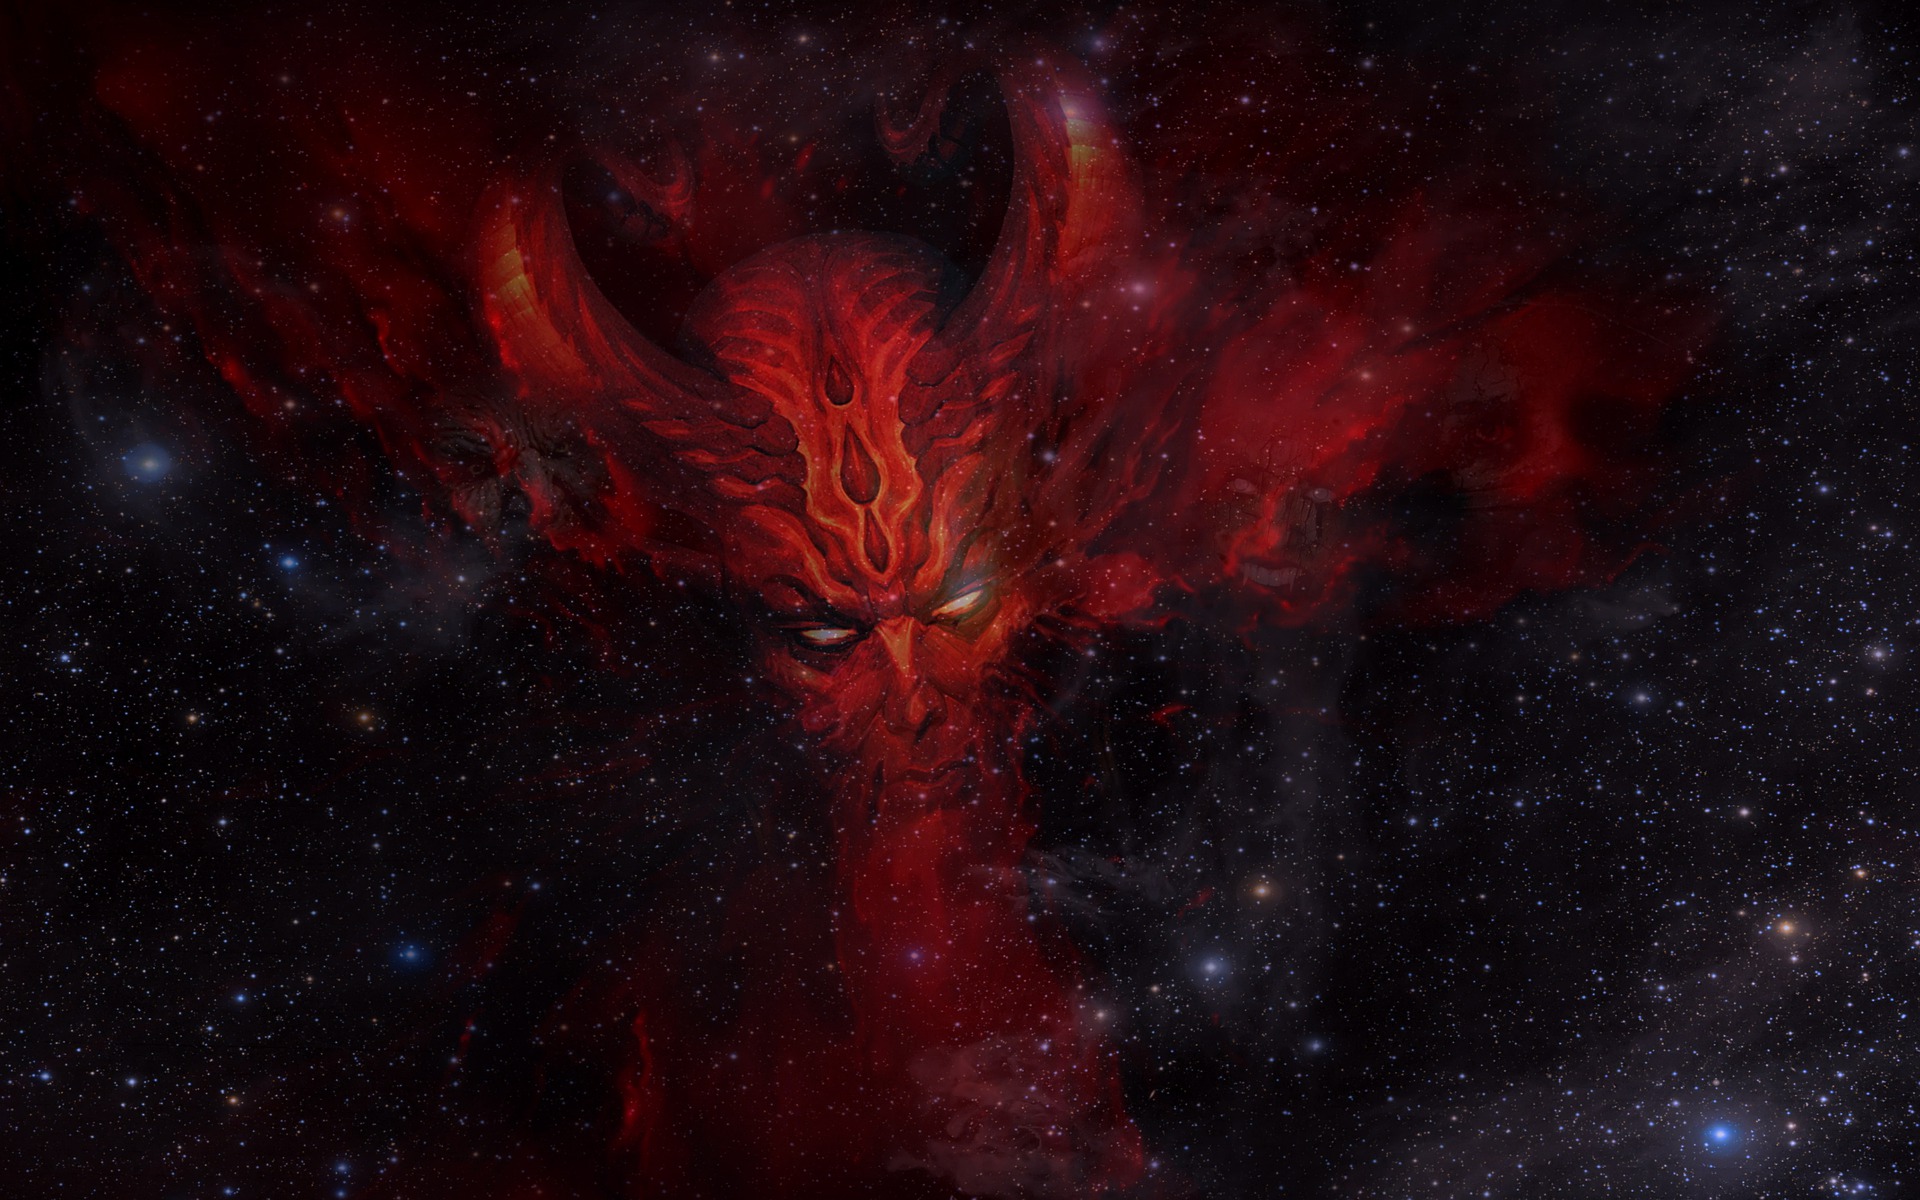 Satan wants to destroy God and rule the universe. (Image by ParallelVision from Pixabay)